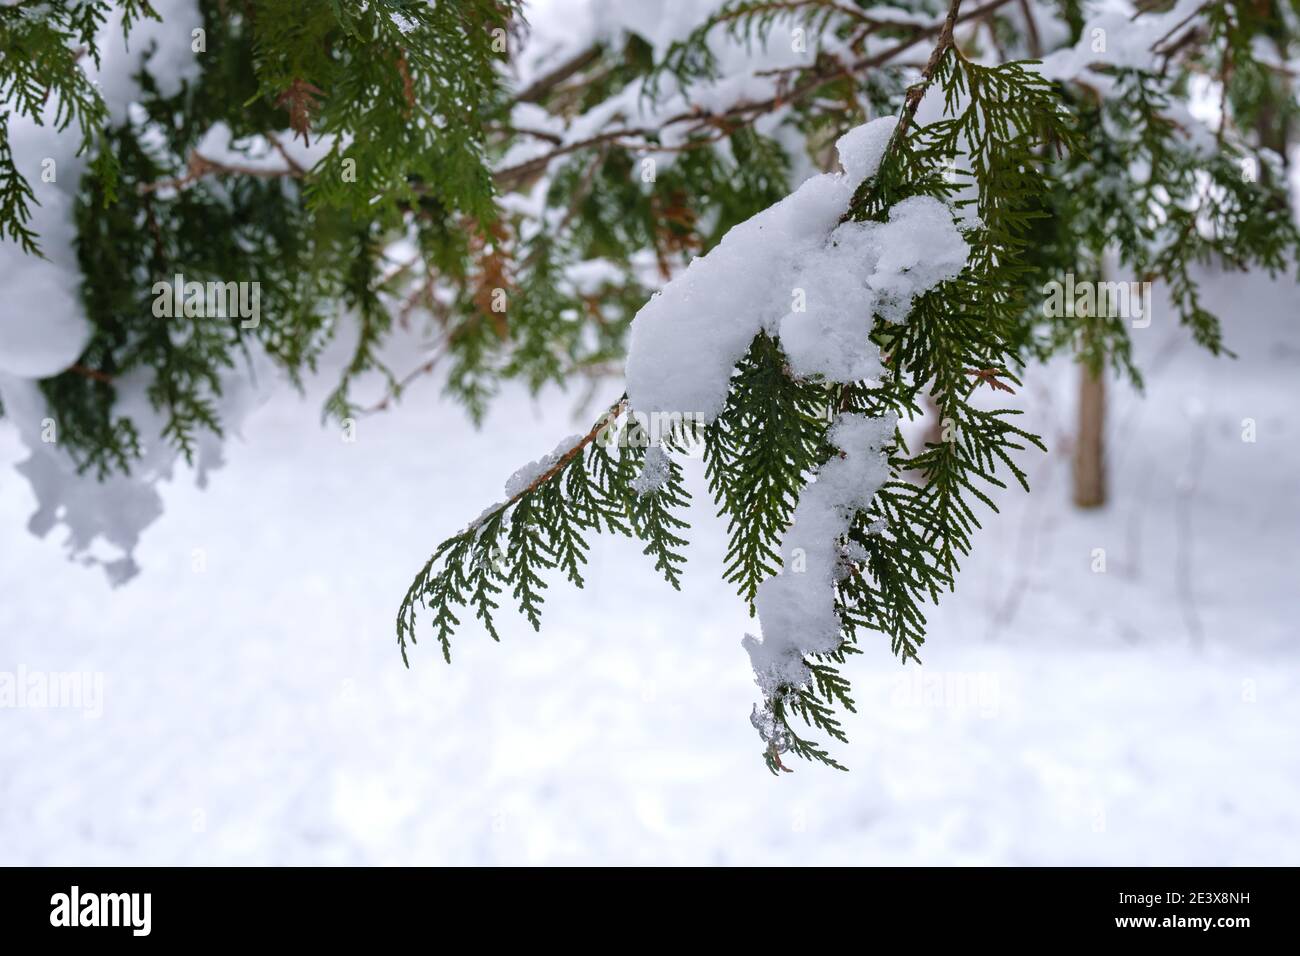 Icy snow weighs down the branches of a northern white cedar tree in the winter. Stock Photo